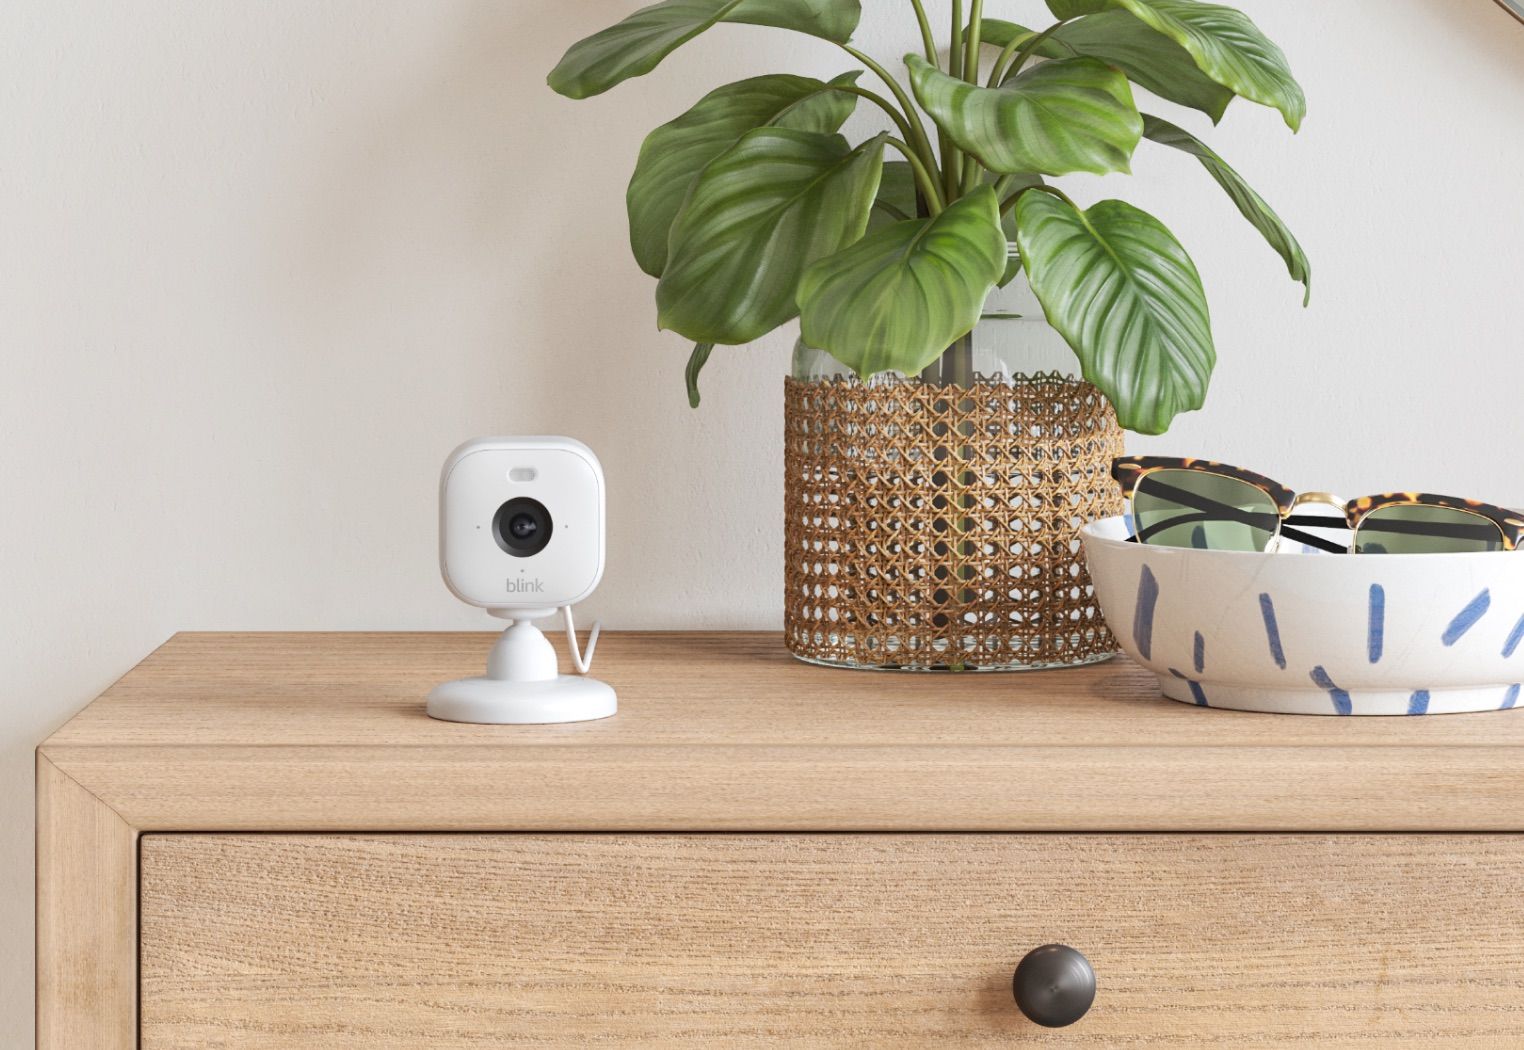 A Blink Mini 2 camera sitting on a light wood dresser next to a plant and a bowl with sunglasses in it